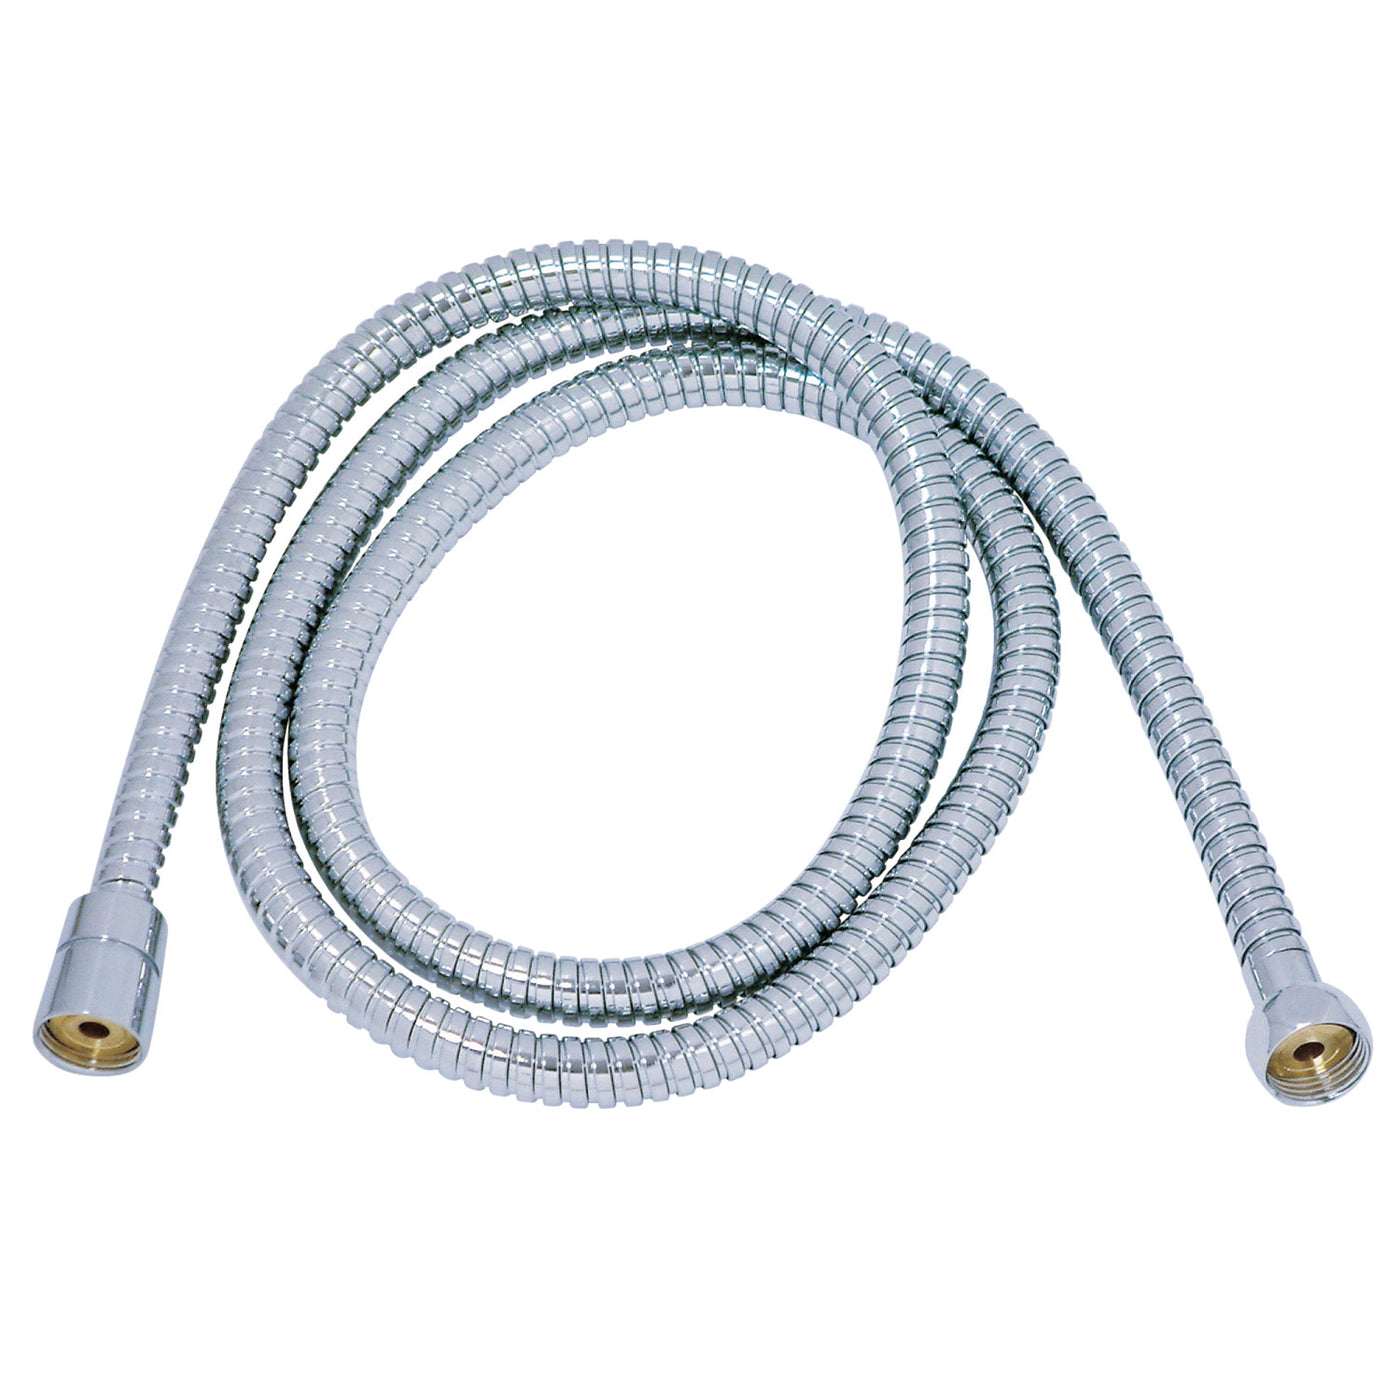 Elements of Design EDH659CRI 59-Inch Double Spiral Stainless Steel Hose, Polished Chrome